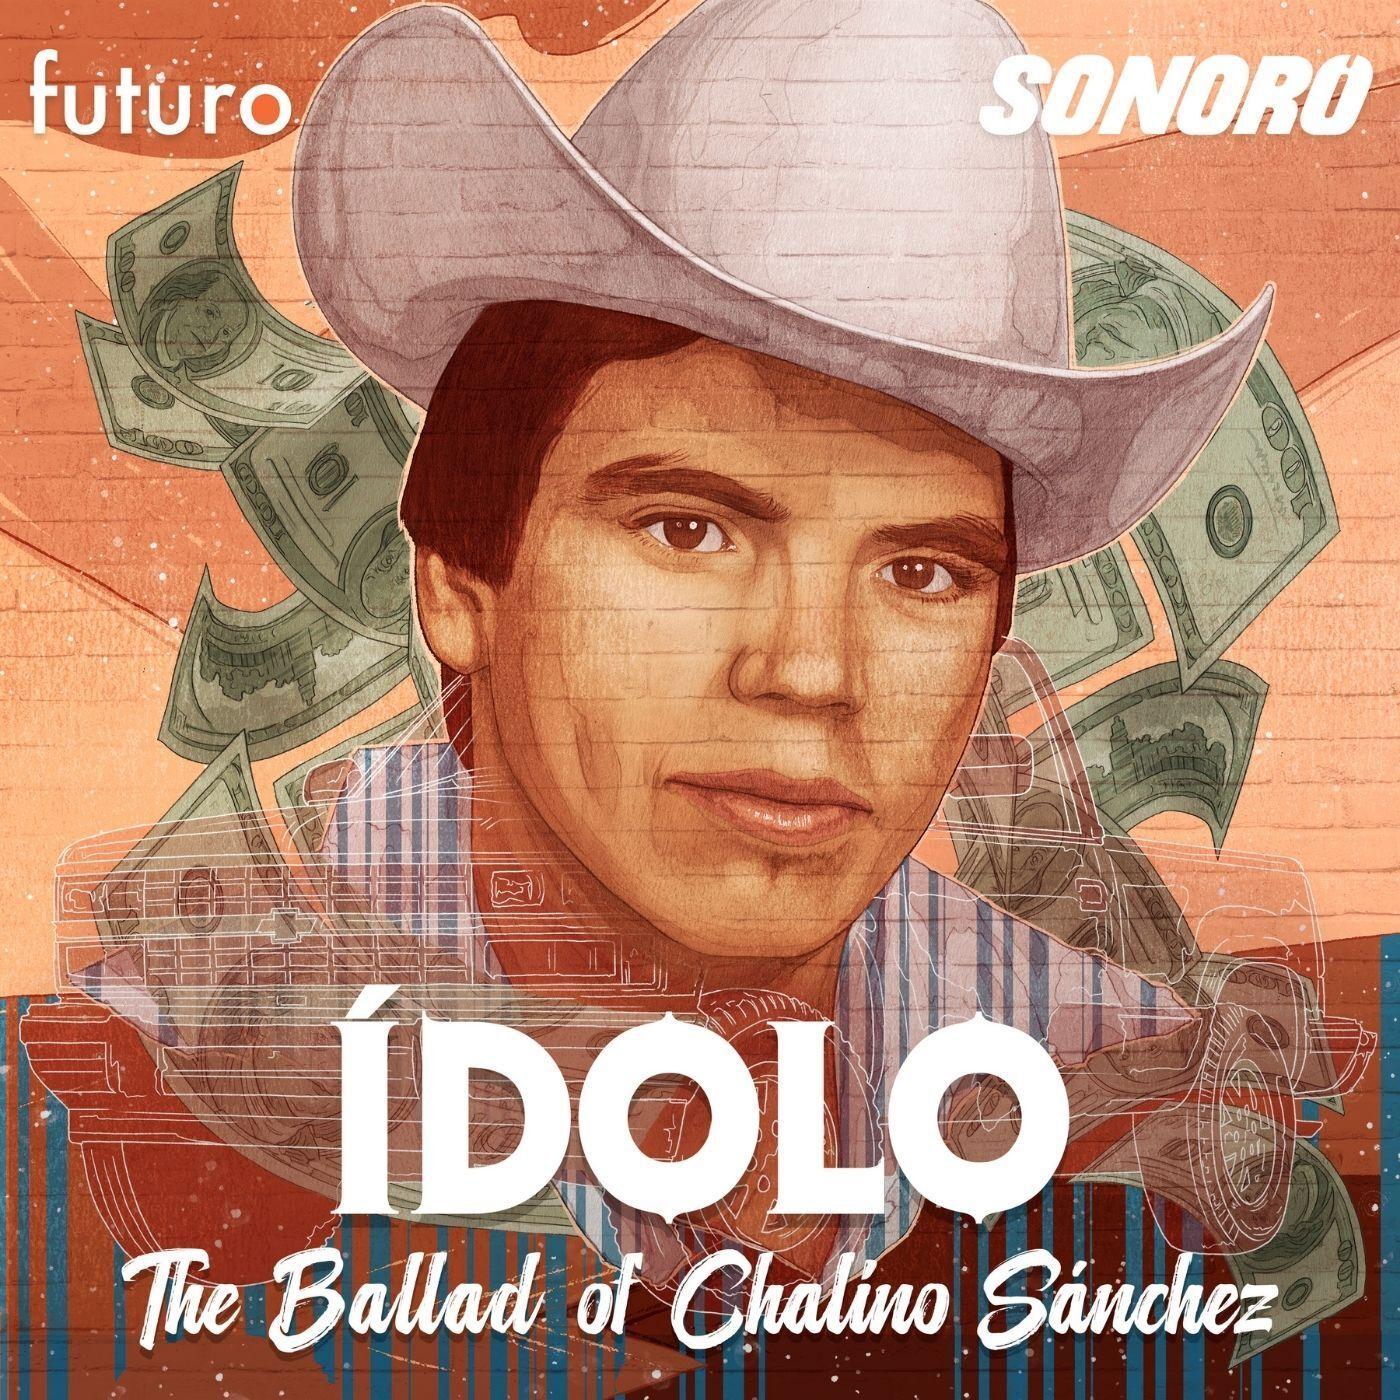 Thumbnail for "The Fiesta Theory — Ídolo: The Ballad of Chalino Sánchez".